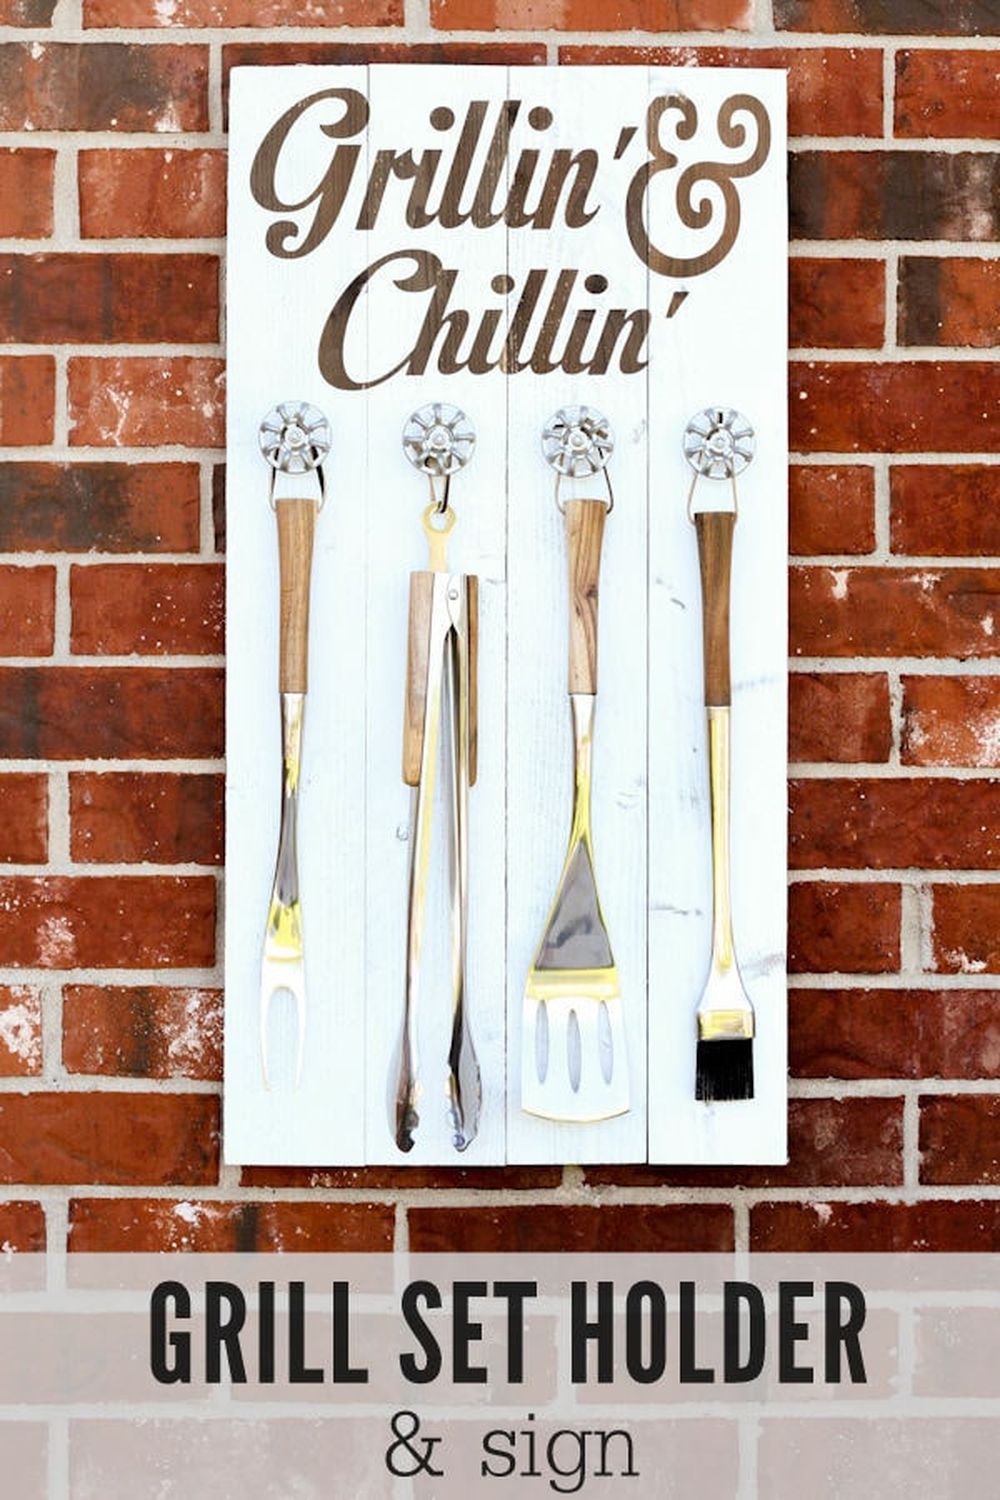 Diy grill set holder cool christmas gifts for dad